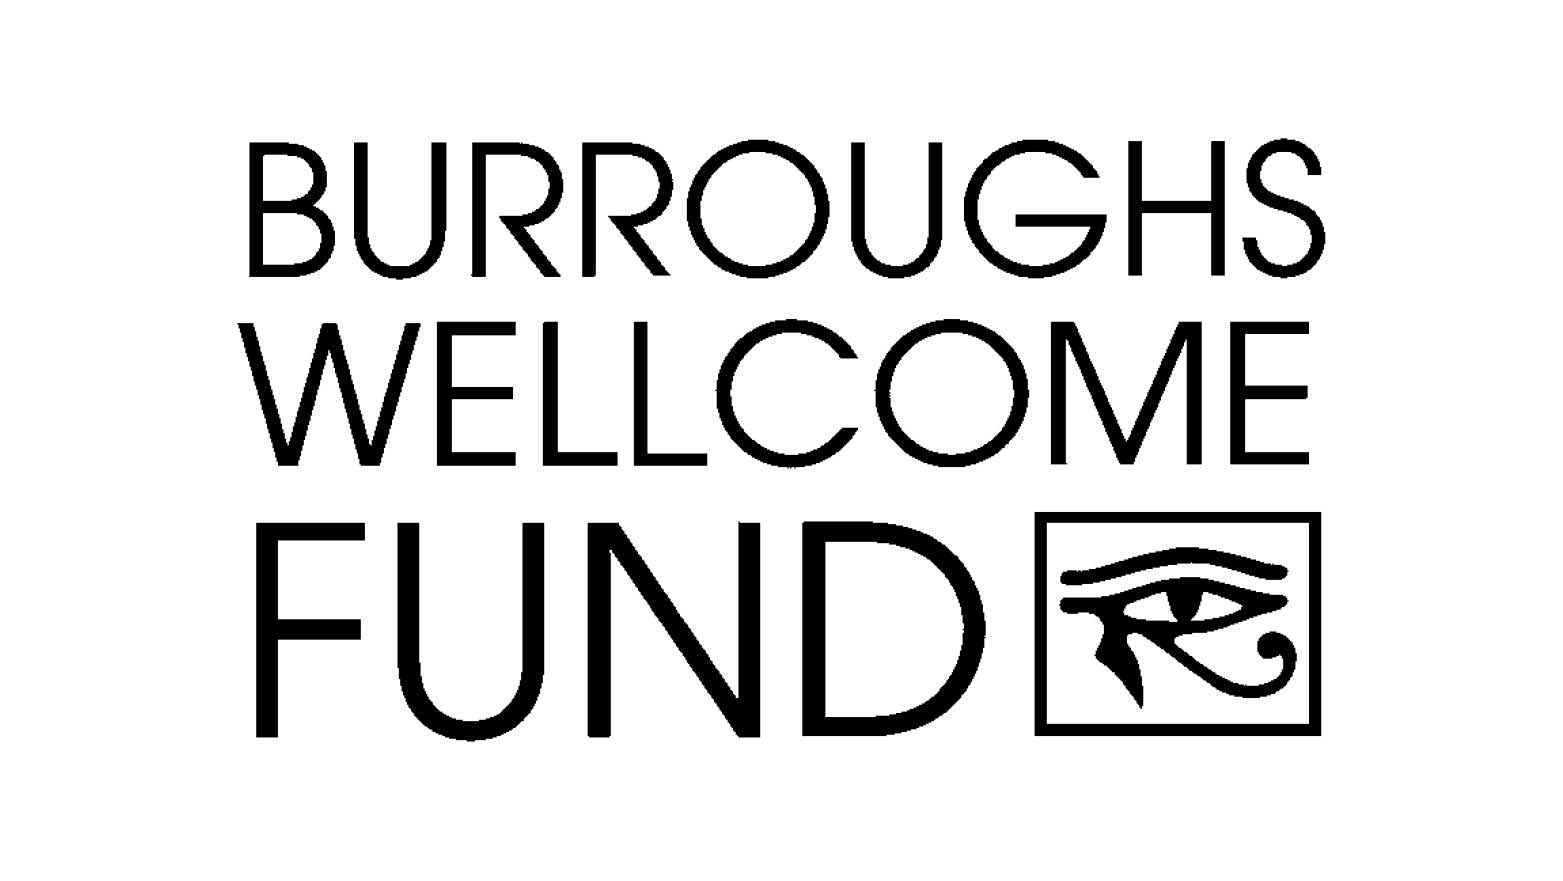 Burroughs Wellcome Fund is a TPDA sponsor of Neuroscience 2021.